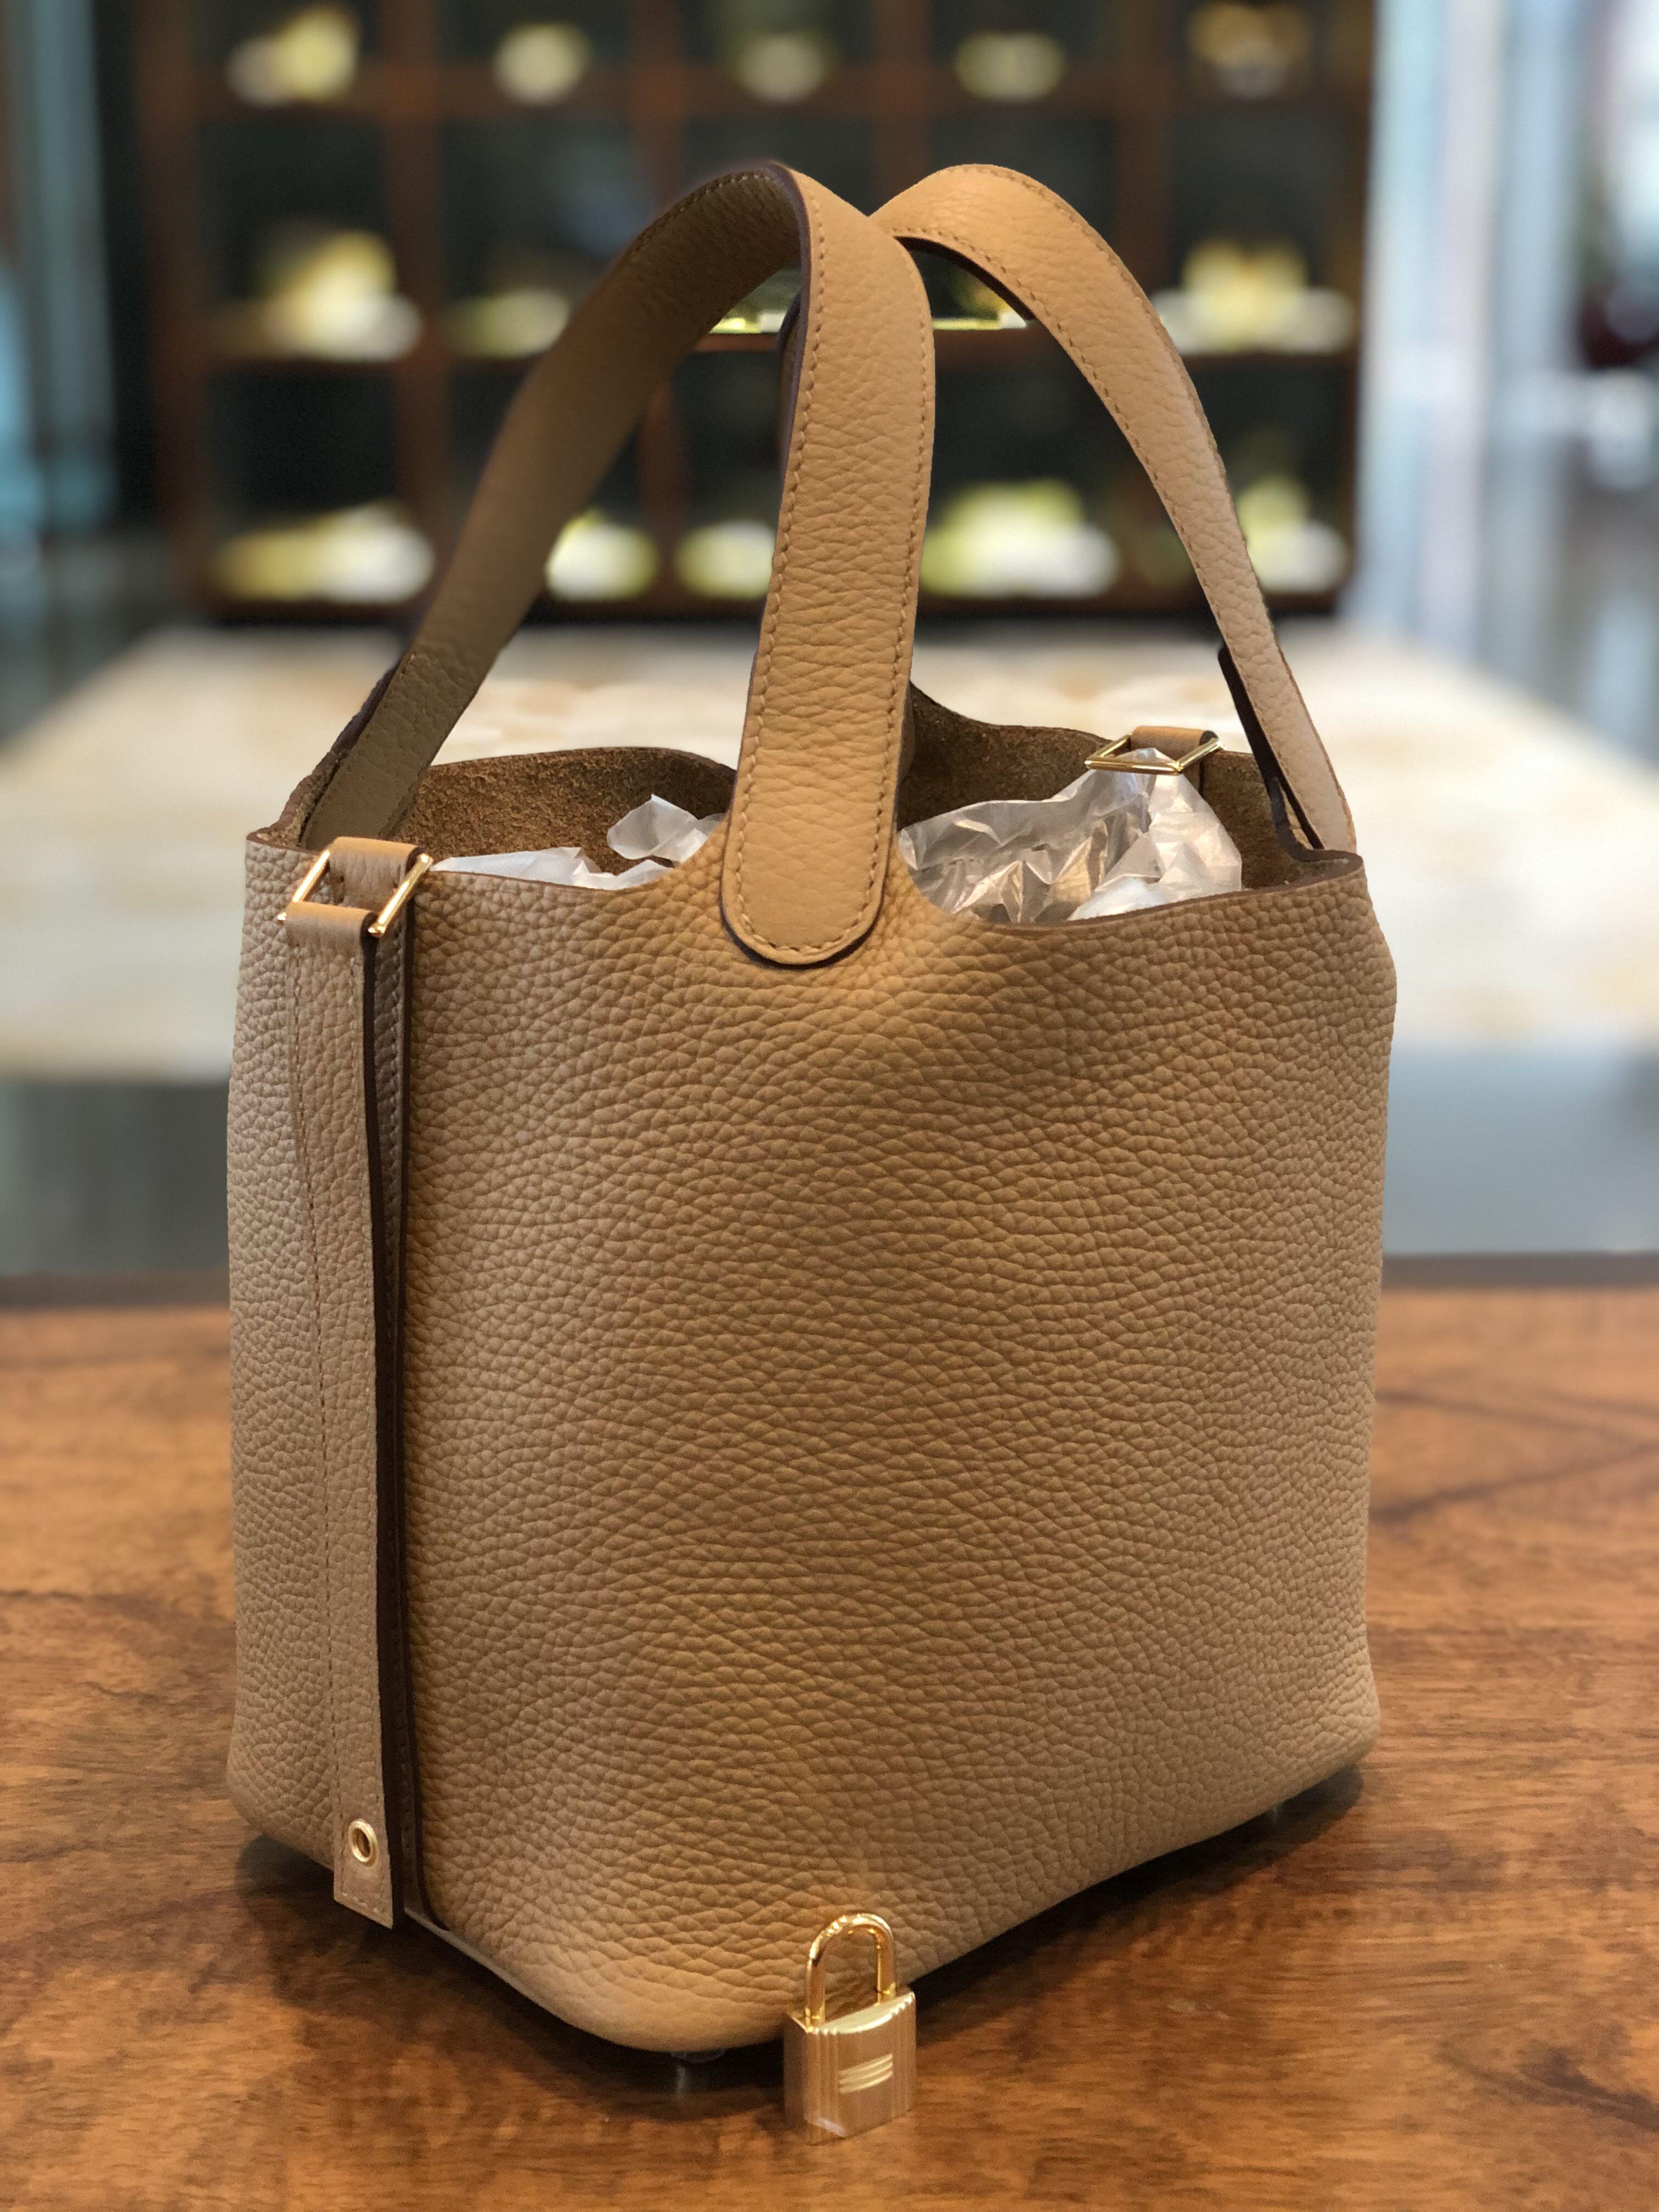 Hermes Picotin 18 in Biscuit Clemence Leather and GHW